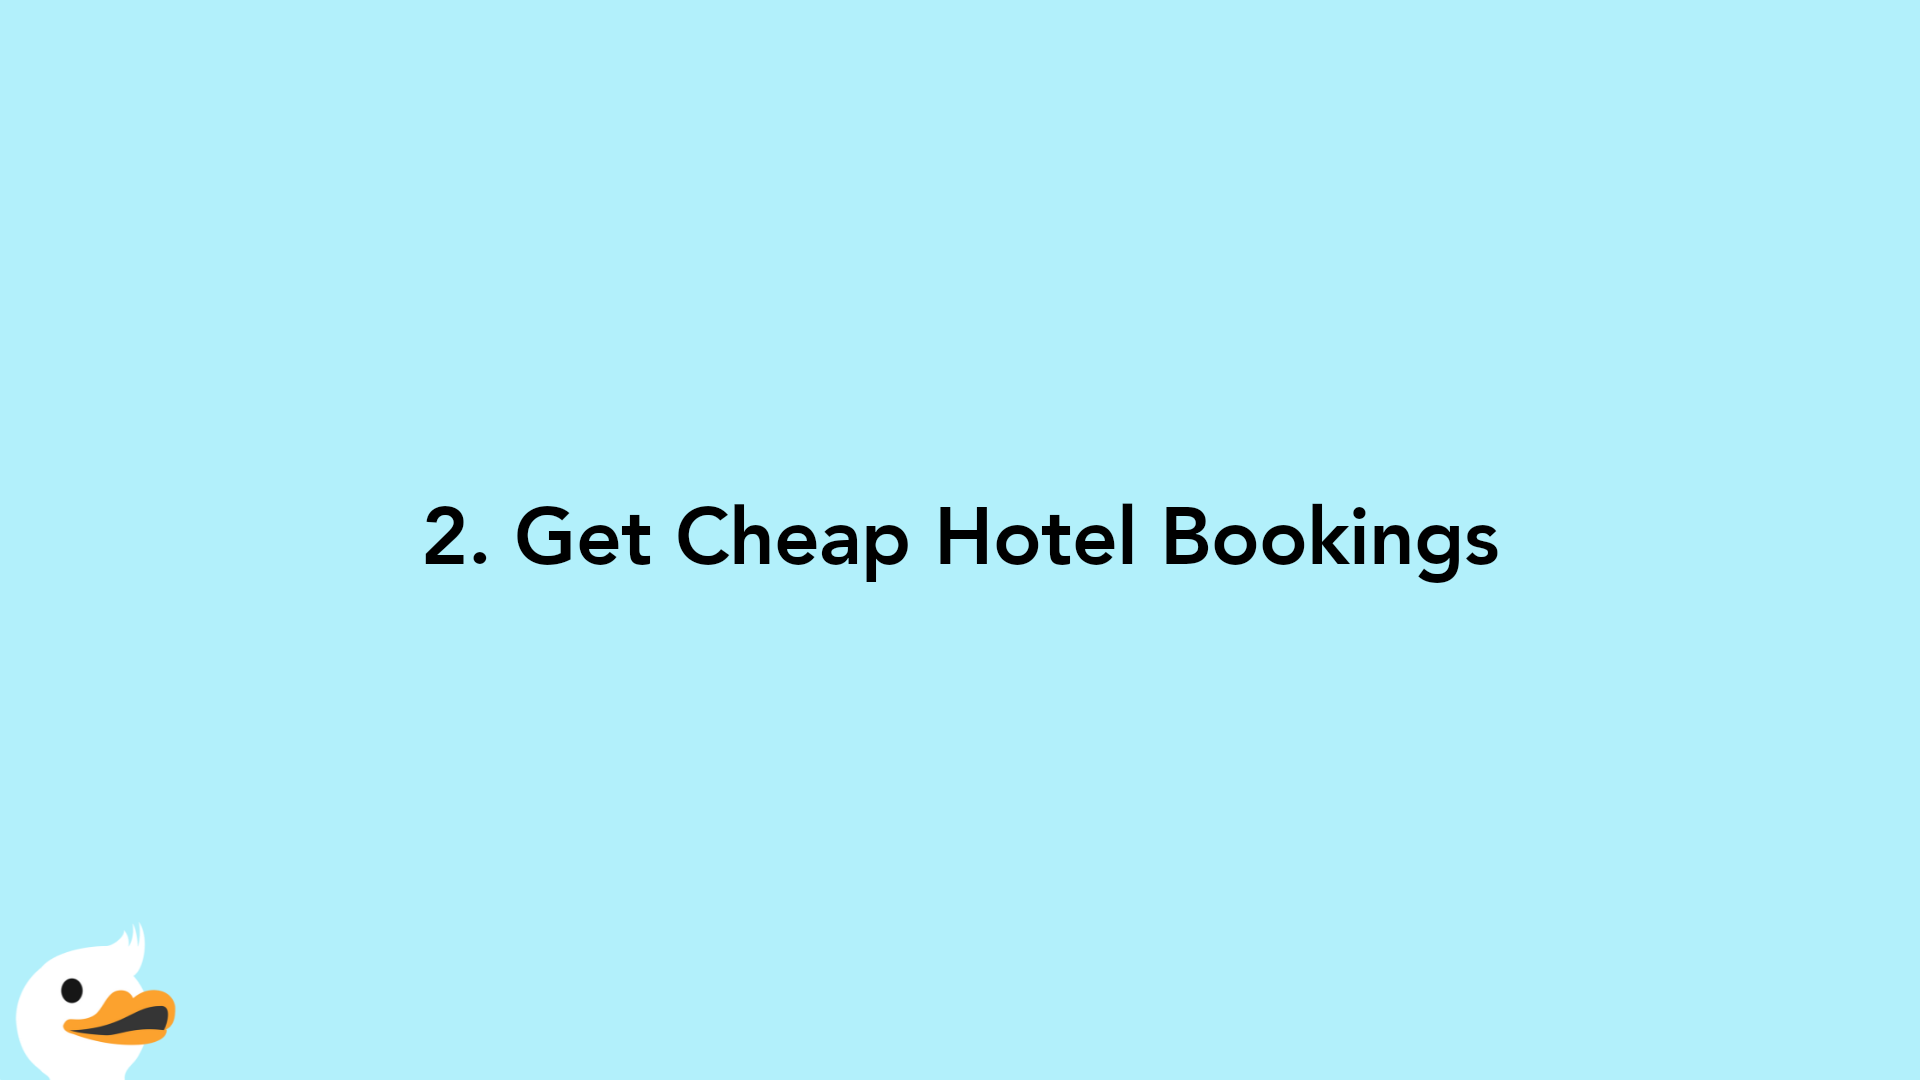 2. Get Cheap Hotel Bookings